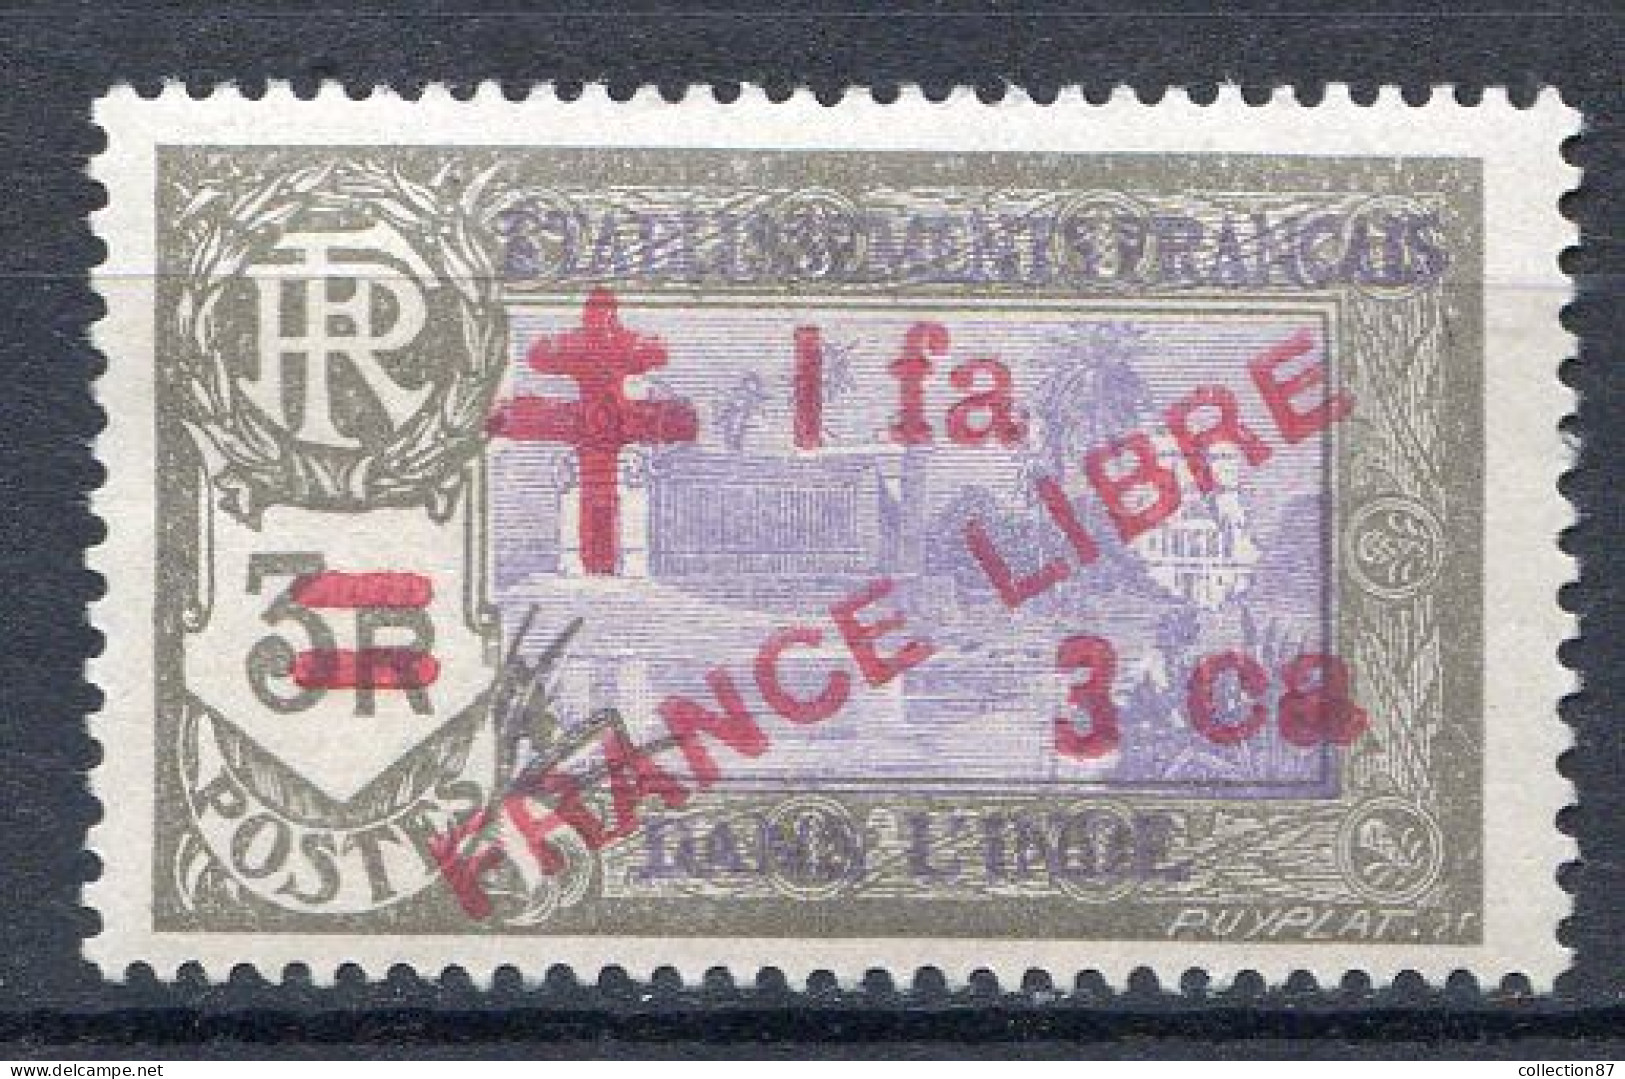 Réf 75 CL2 < -- INDE - FRANCE LIBRE < N° 211 * NEUF Ch.Dos Visible MH * - Nuovi